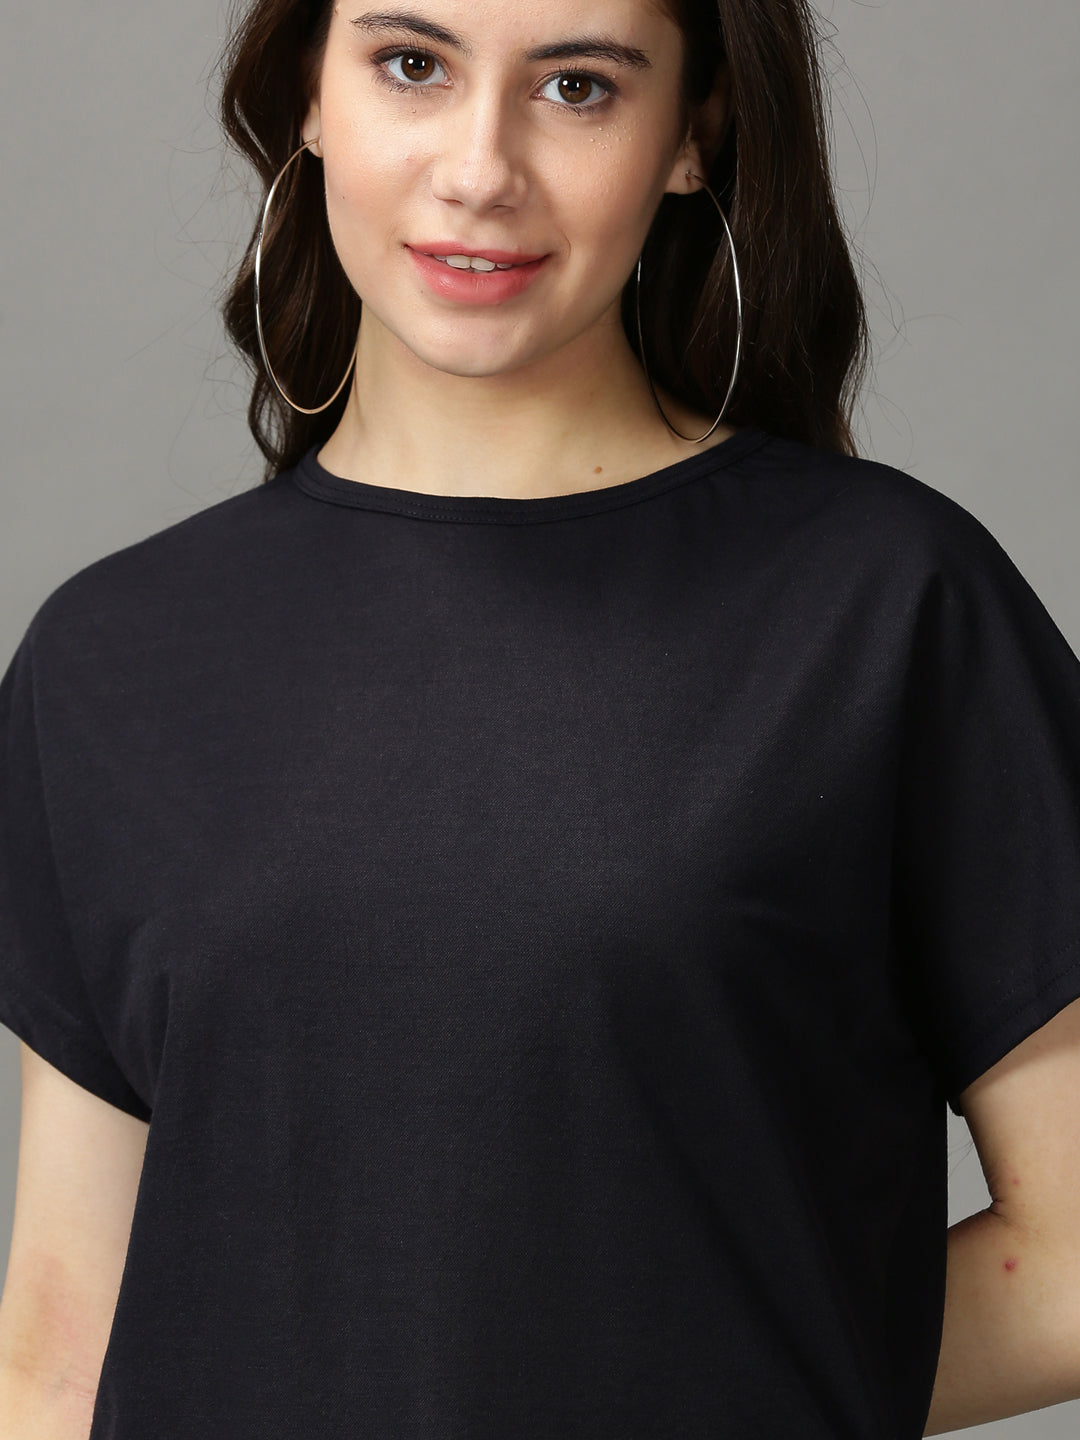 Women's Navy Blue Solid Boxy Top